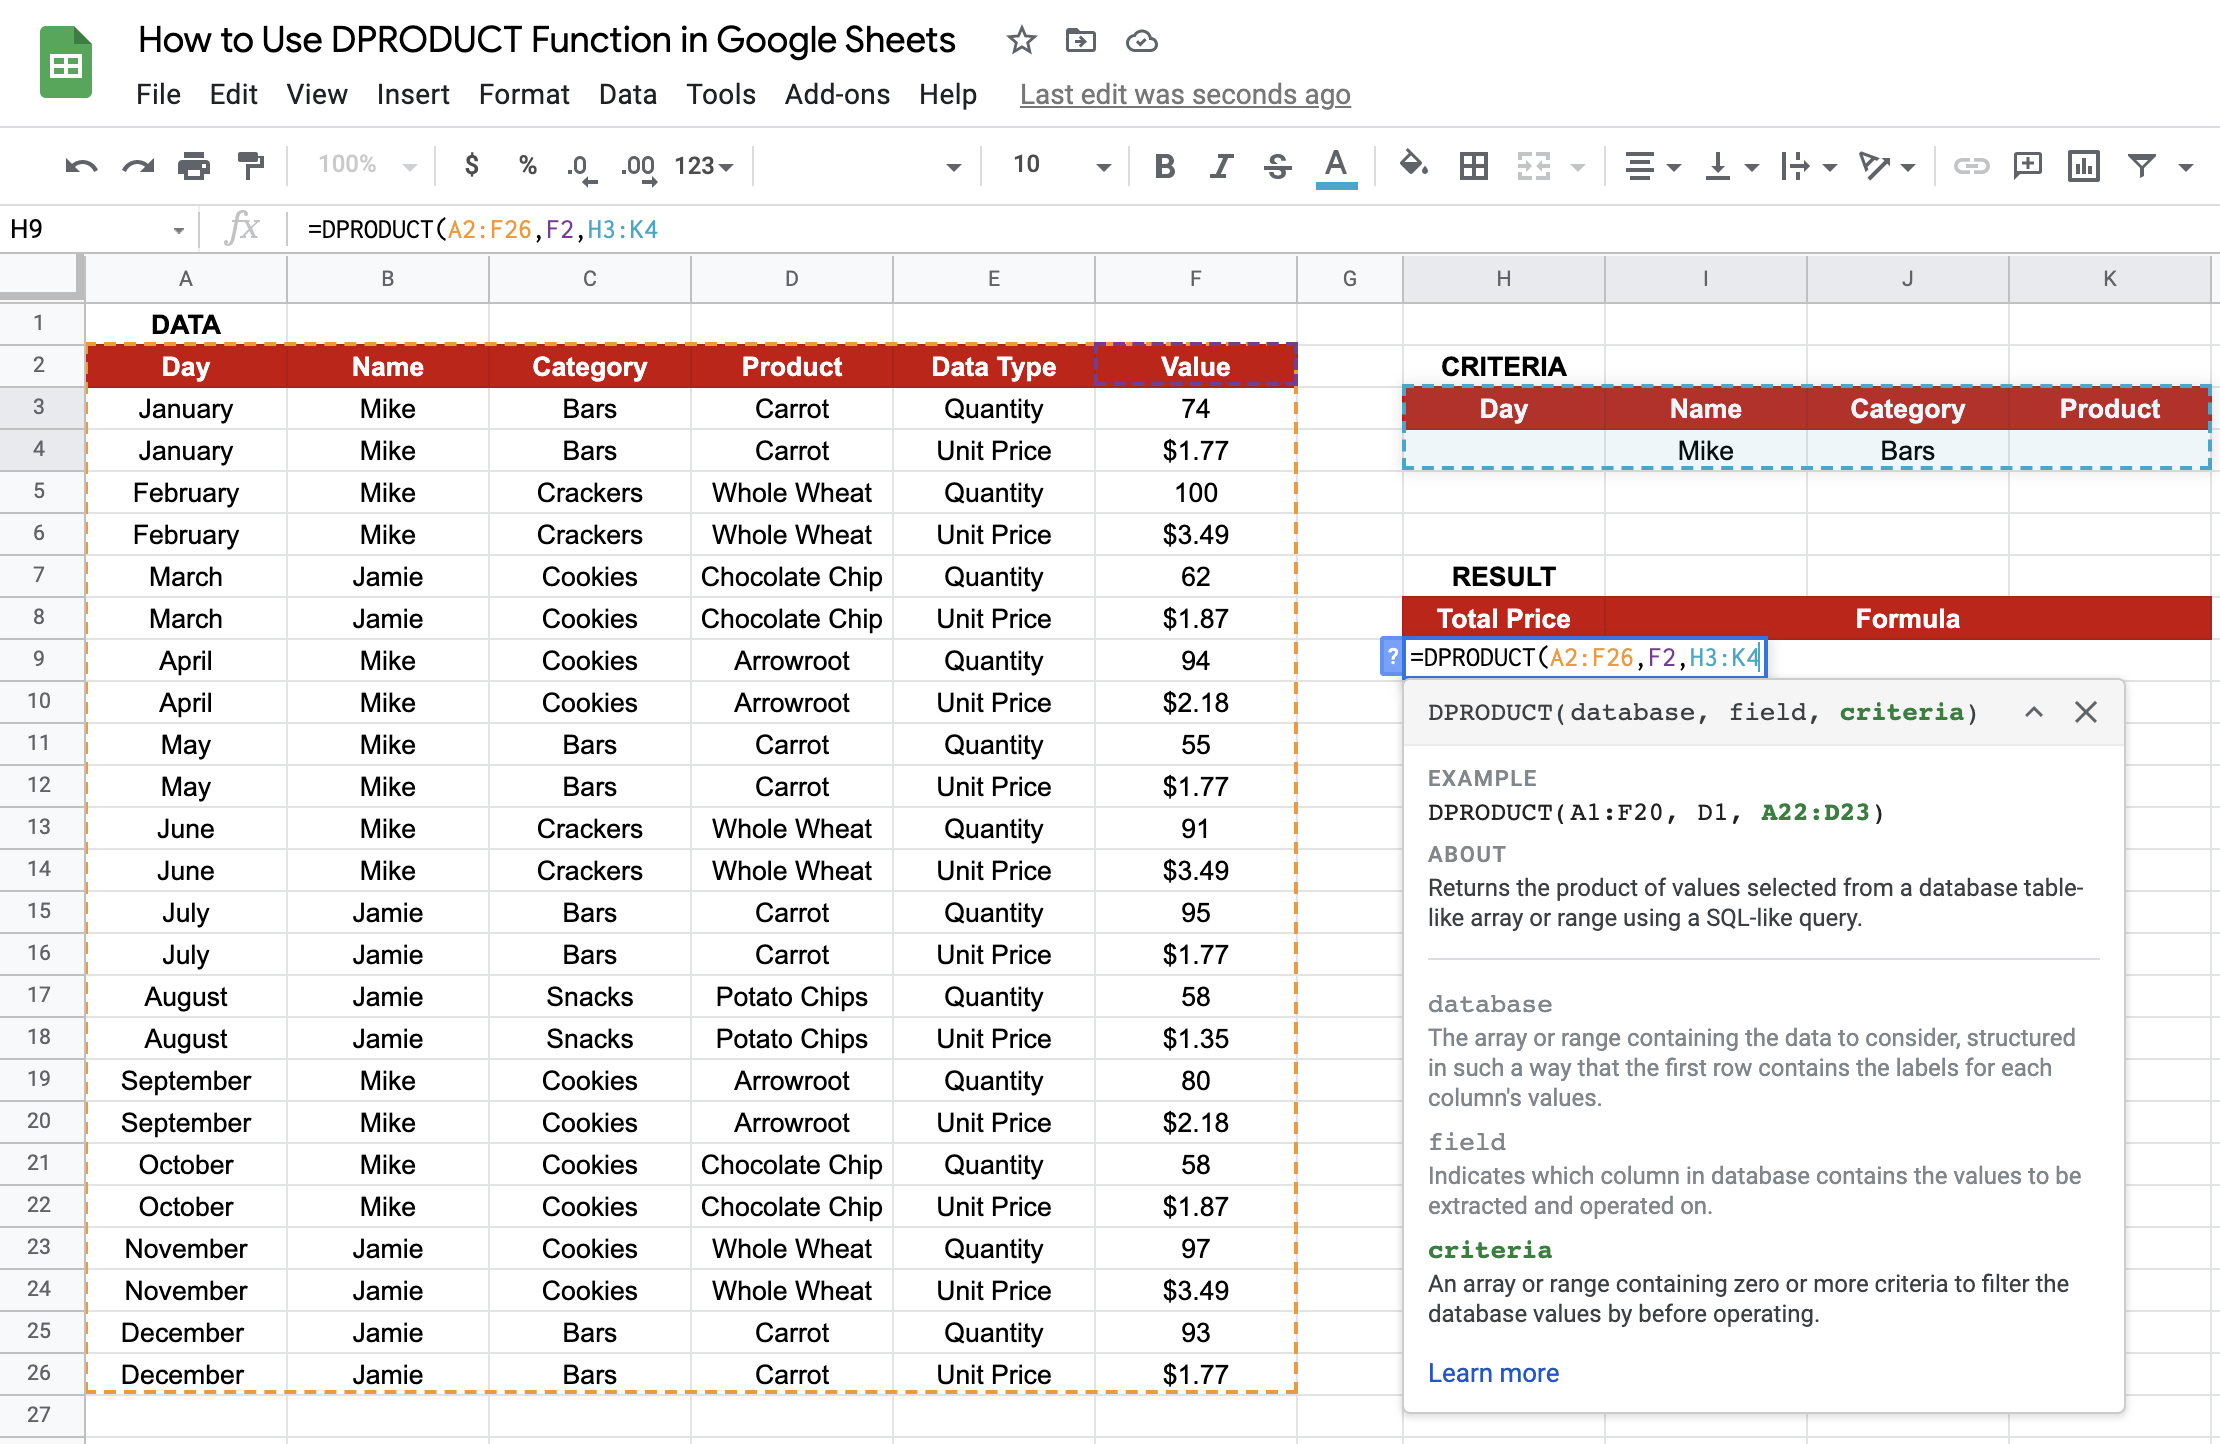 DPRODUCT in Google Sheets